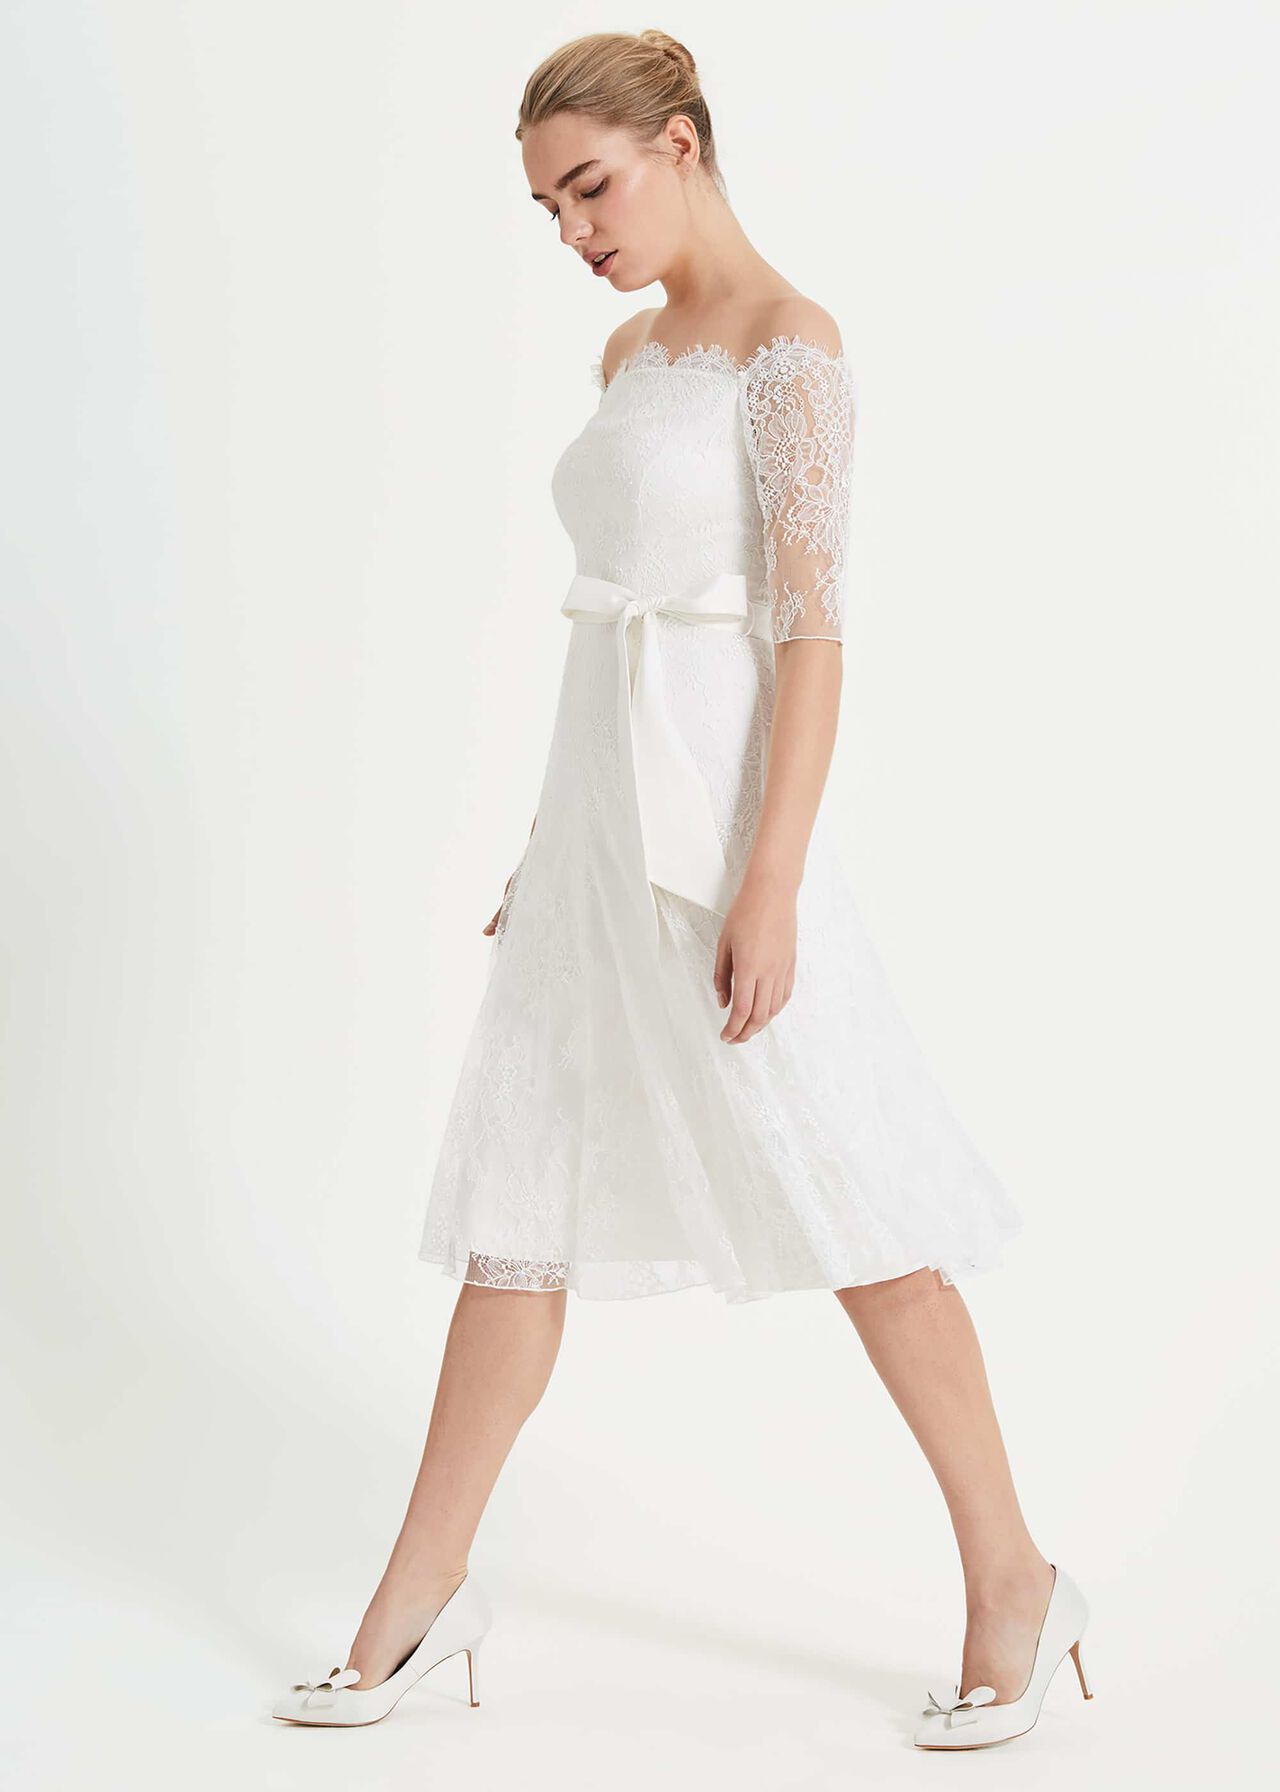 Phase Eight – Evette Lace Wedding Dress Mariage Civil PHASE EIGHT